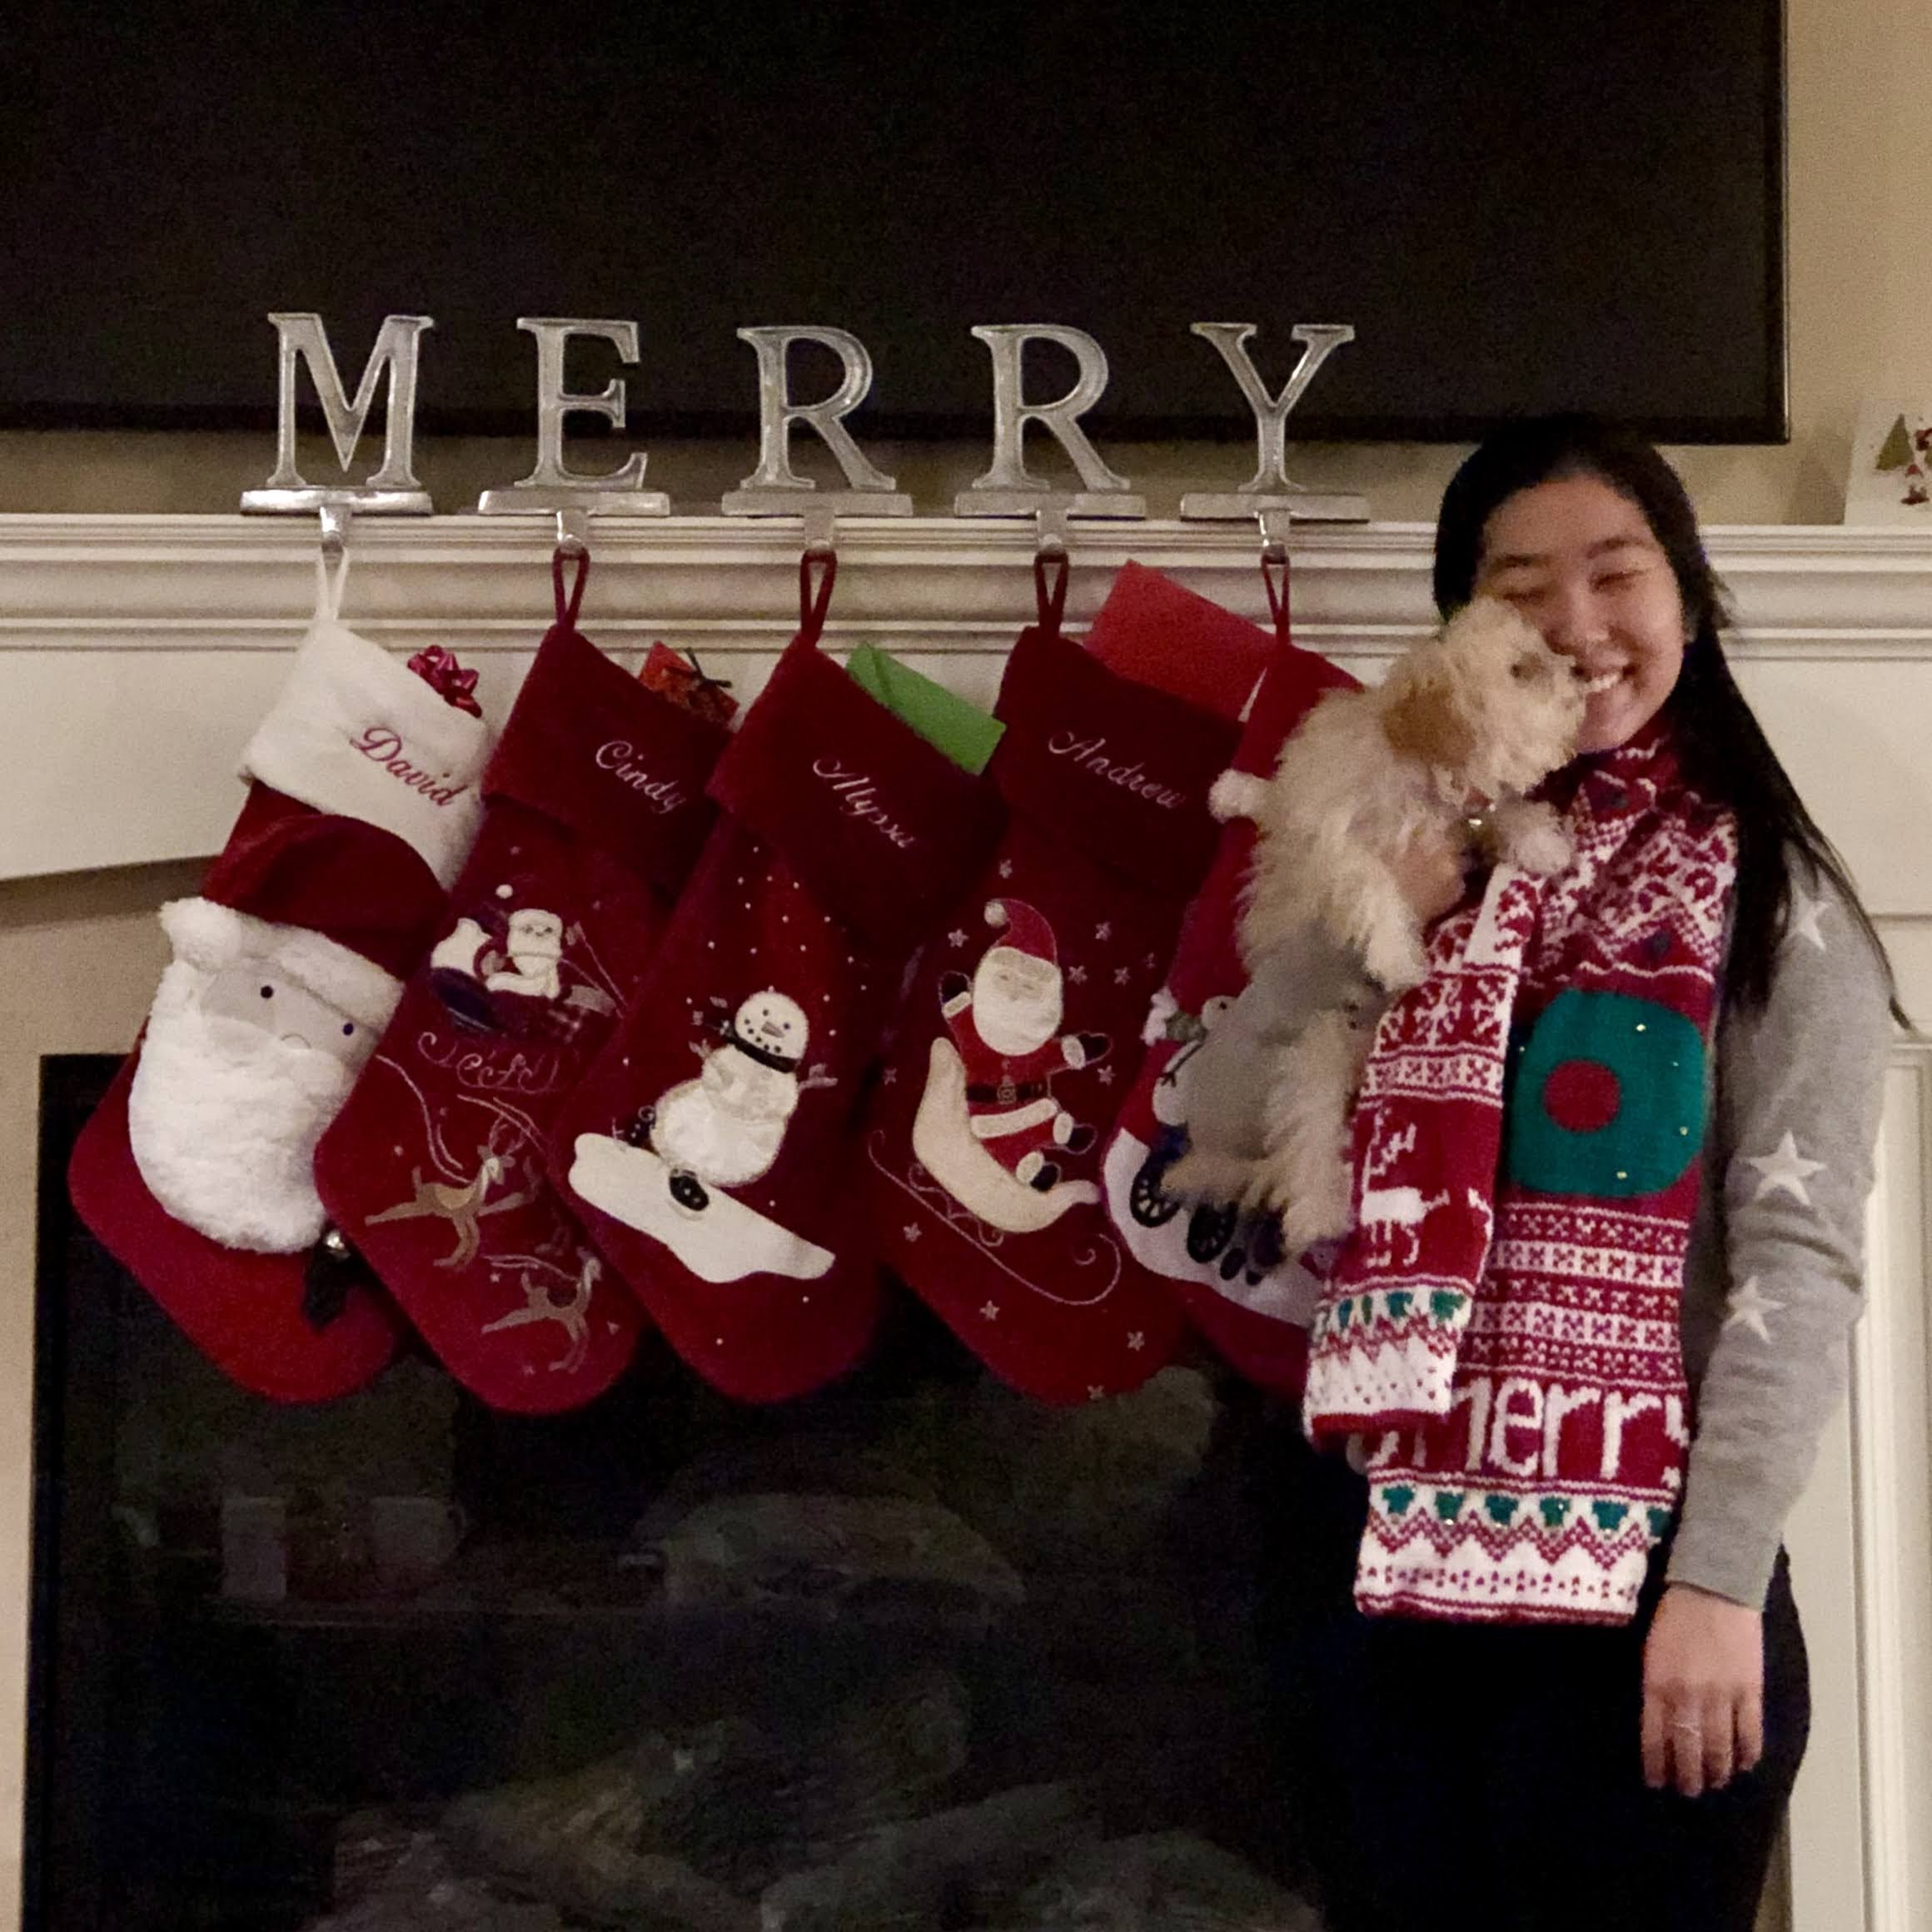 A stranded colorwork knit scarf in the style of an ugly Christmas sweater. It is mostly red and white, with a large green wreath, snowflakes, reindeer, and "MERRY" in big letters. I am wearing it and posing next to some stockings hung on a fireplace with my small fluffy dog, who is trying to lick my nose.